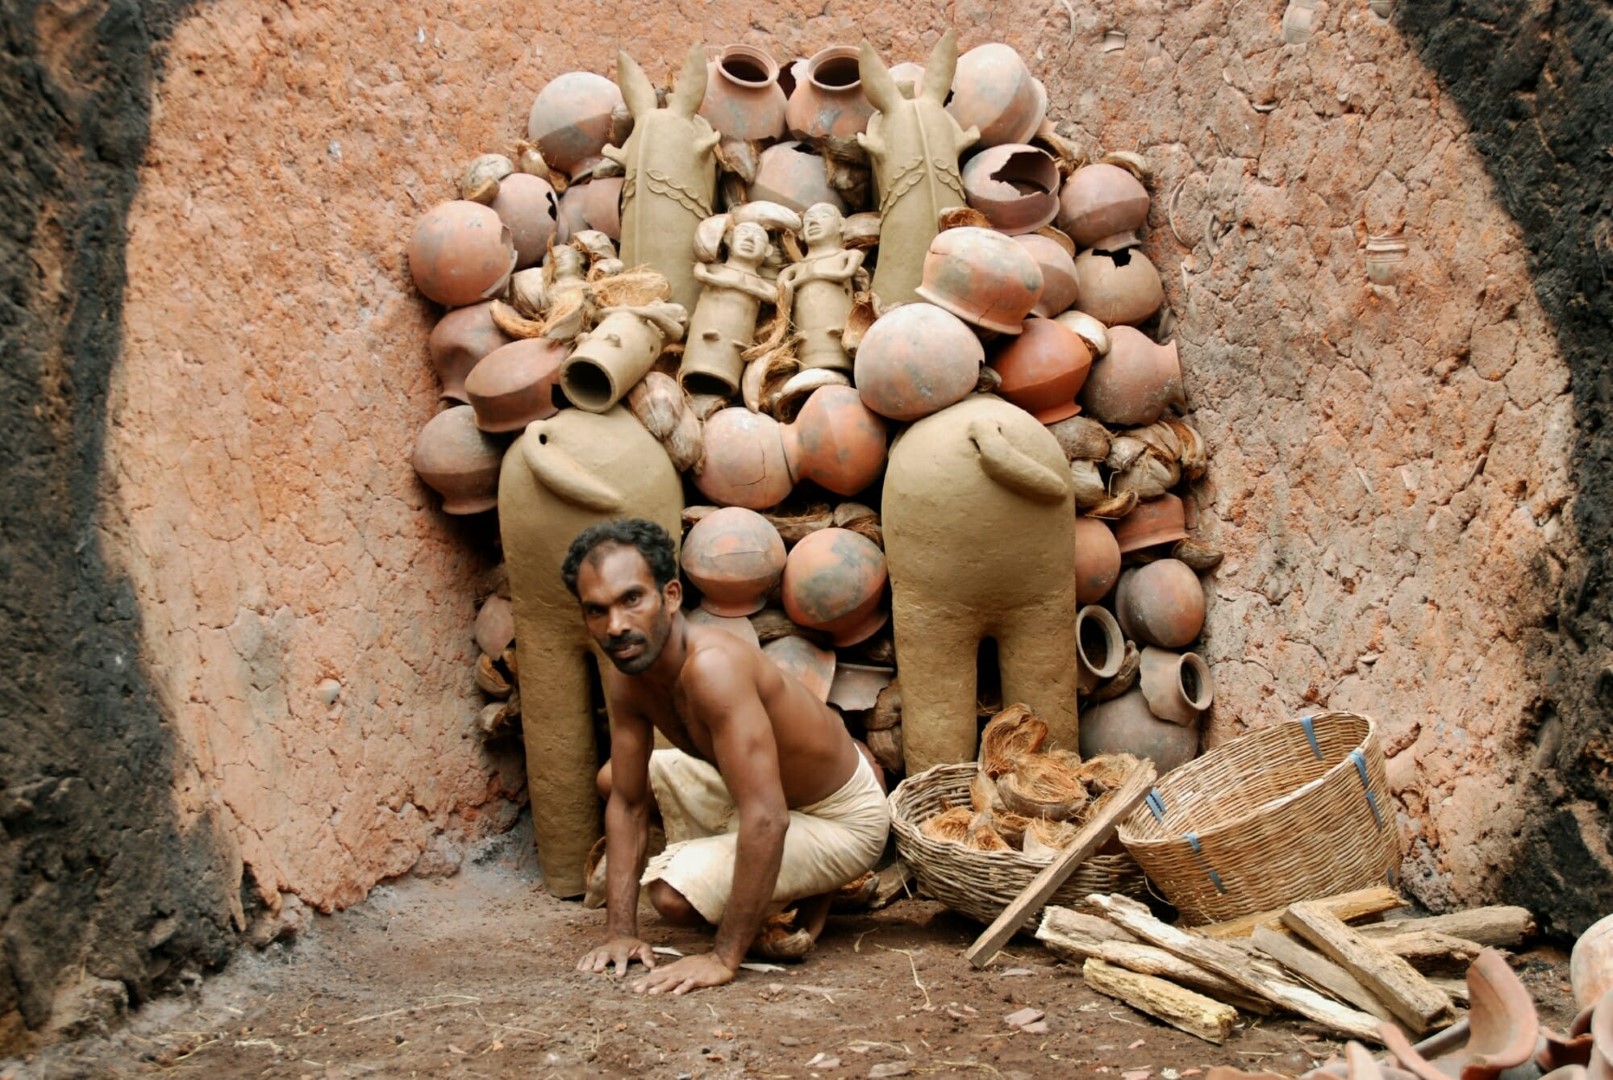 <span style="font-weight:normal;">Jaganathan has started arranging the dried pieces and the combustible material (wood and coconut shells and husk) in the oven. The clay pots and shards are used as air ducts for the easy circulation of heat.</span>